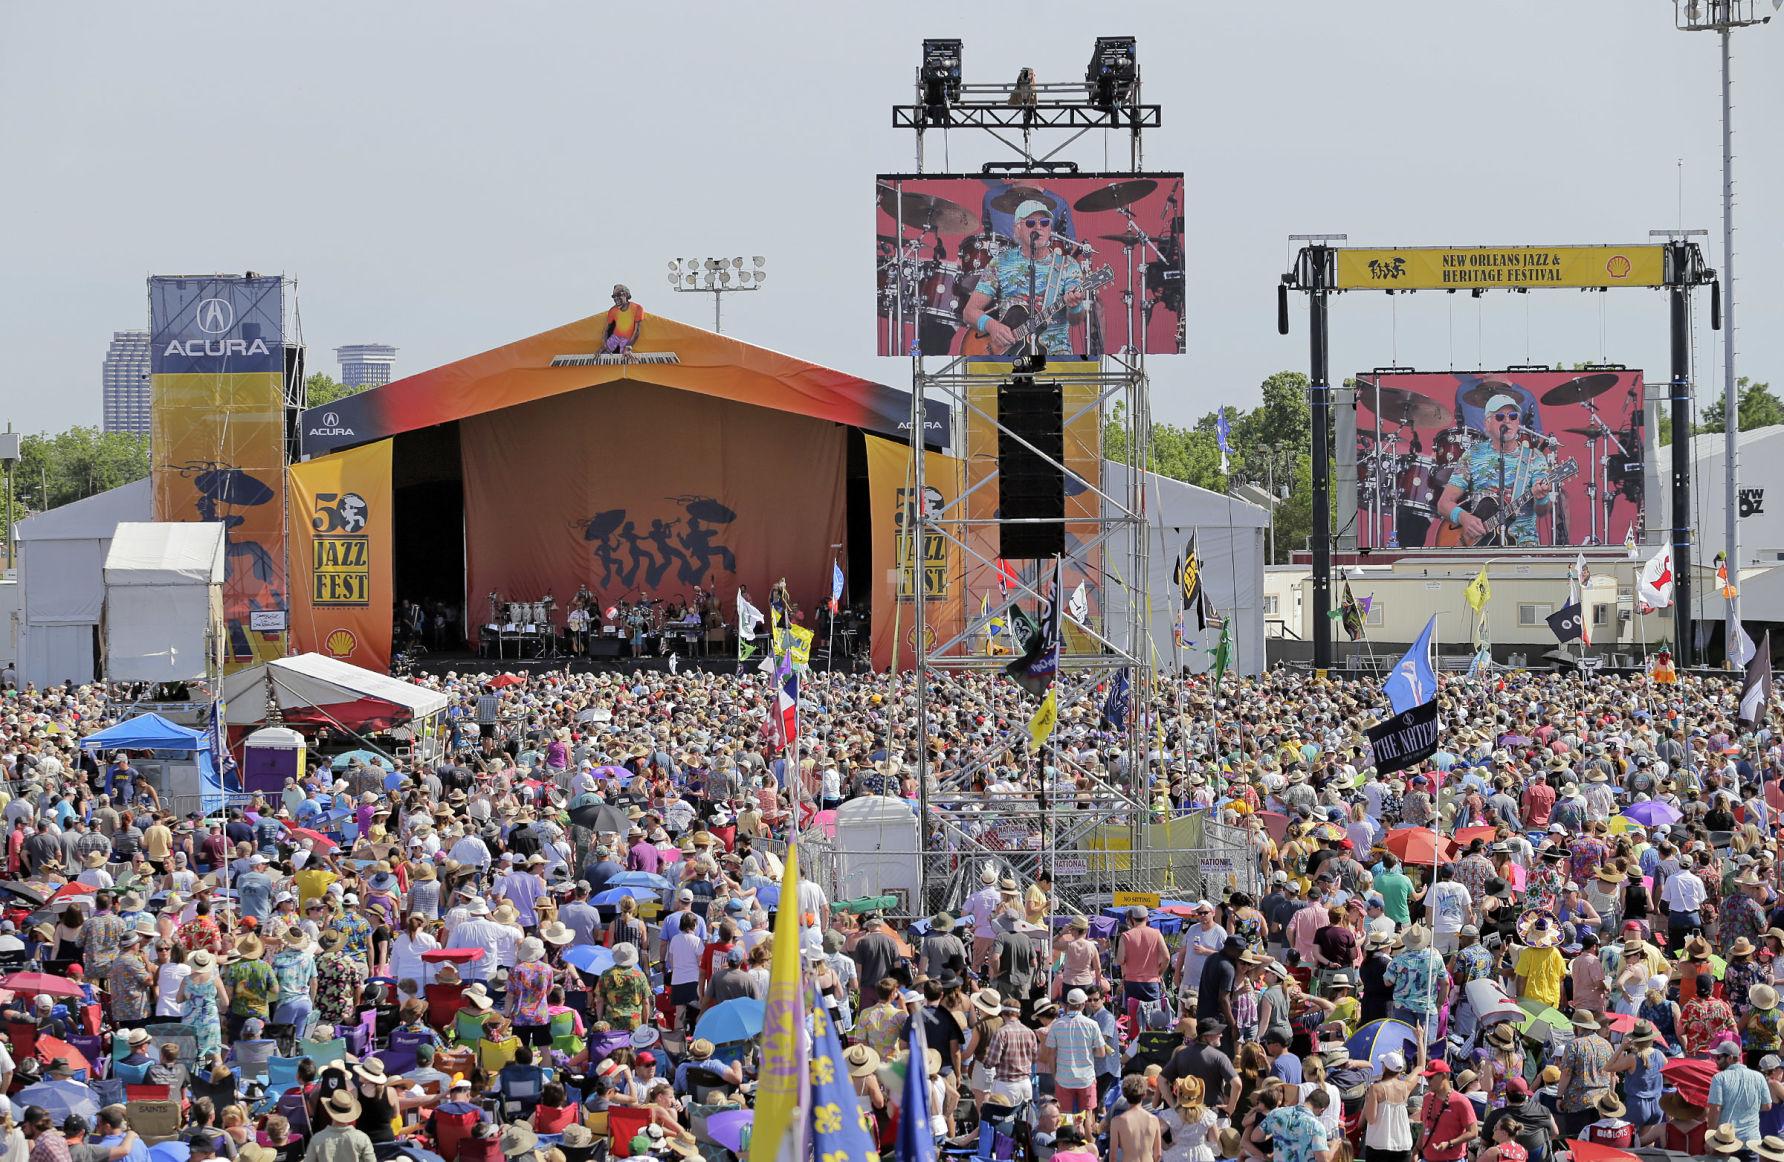 New Orleans Jazz & Heritage Festival 2020 postponed to fall Music